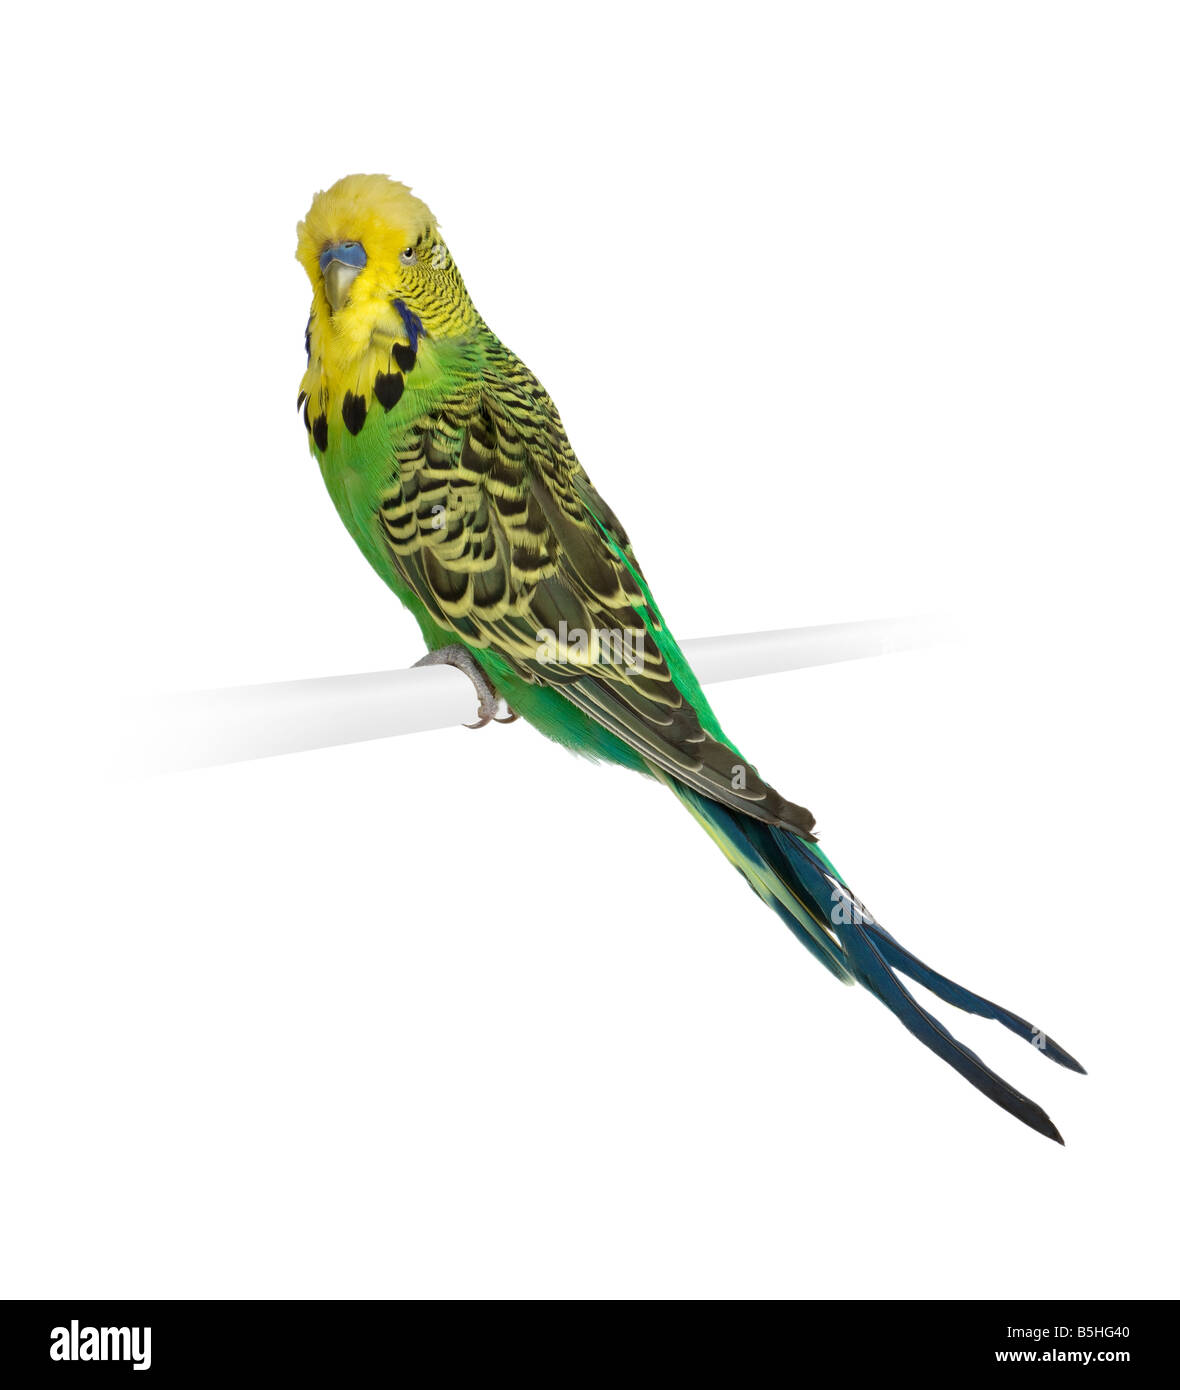 Budgerigar in front of a white background Stock Photo